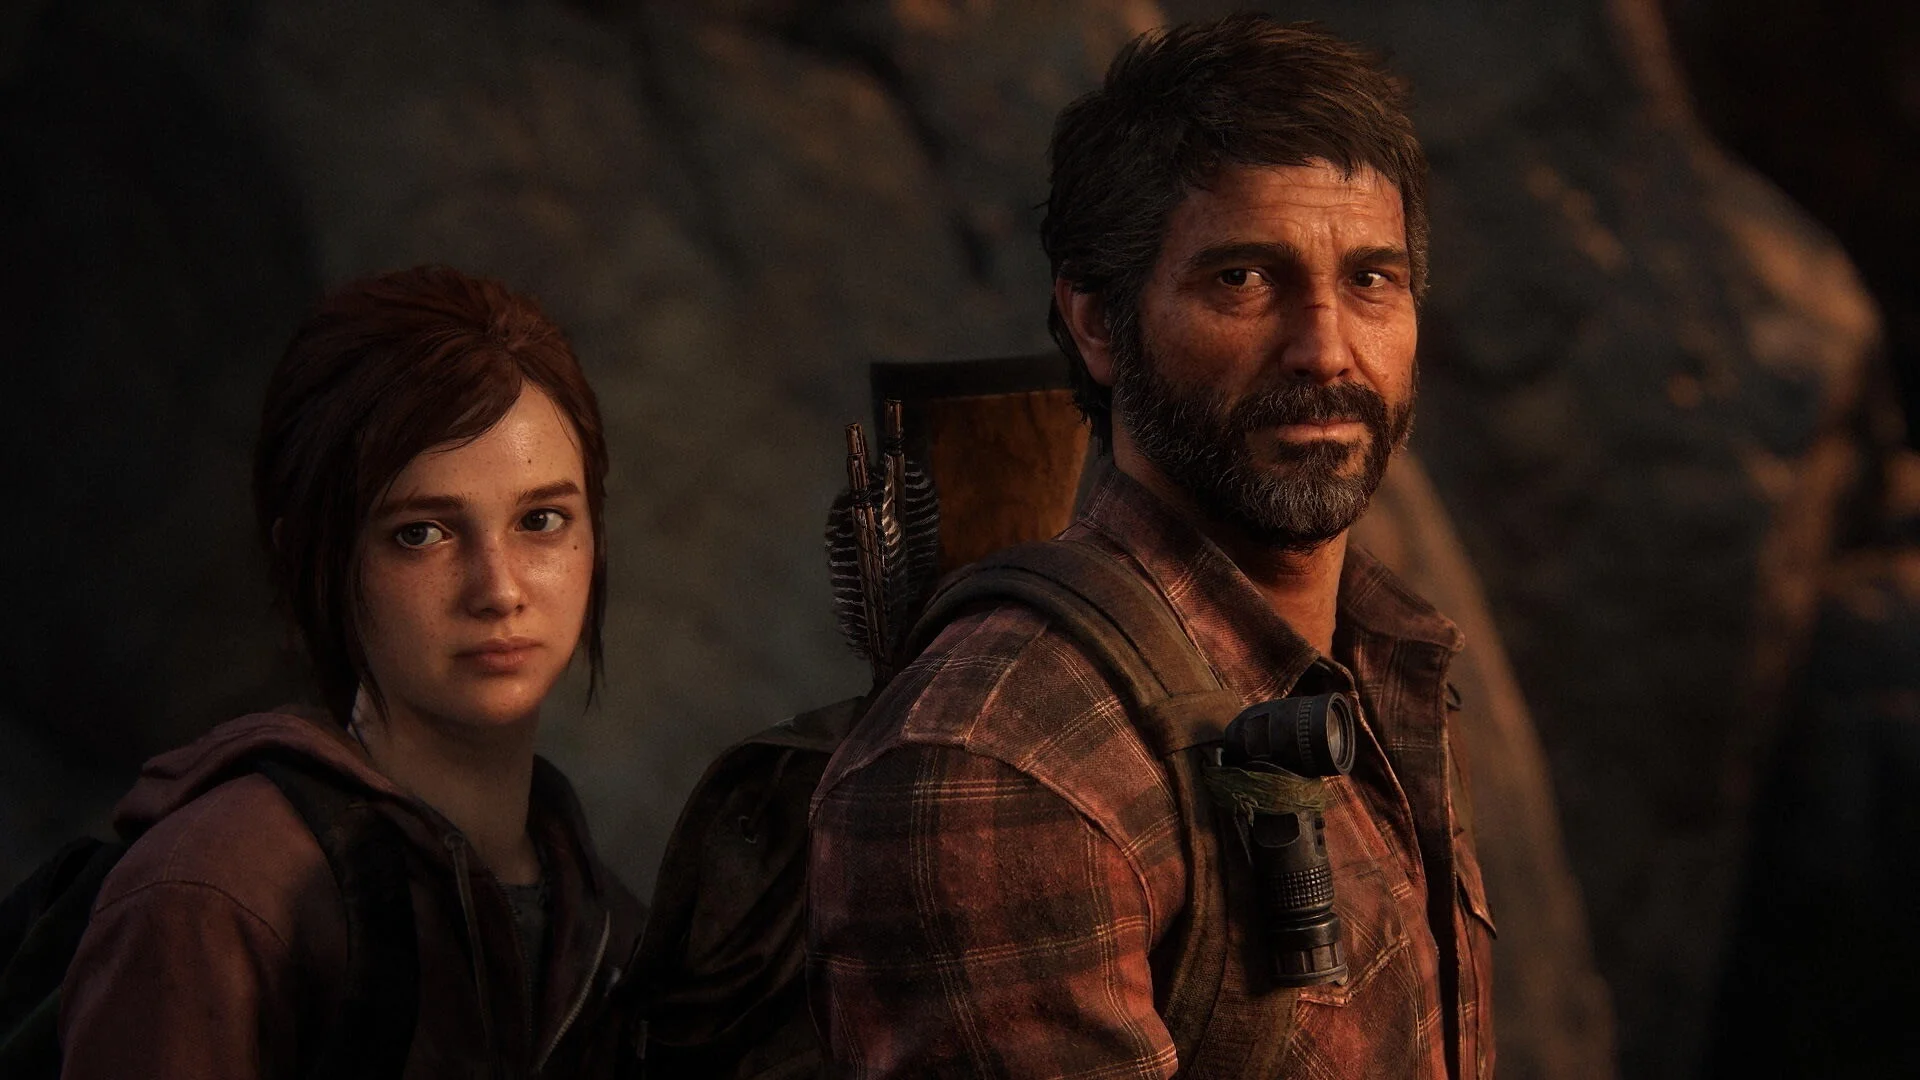 Finally. Steam has begun pre-loading the first part of The Last of Us